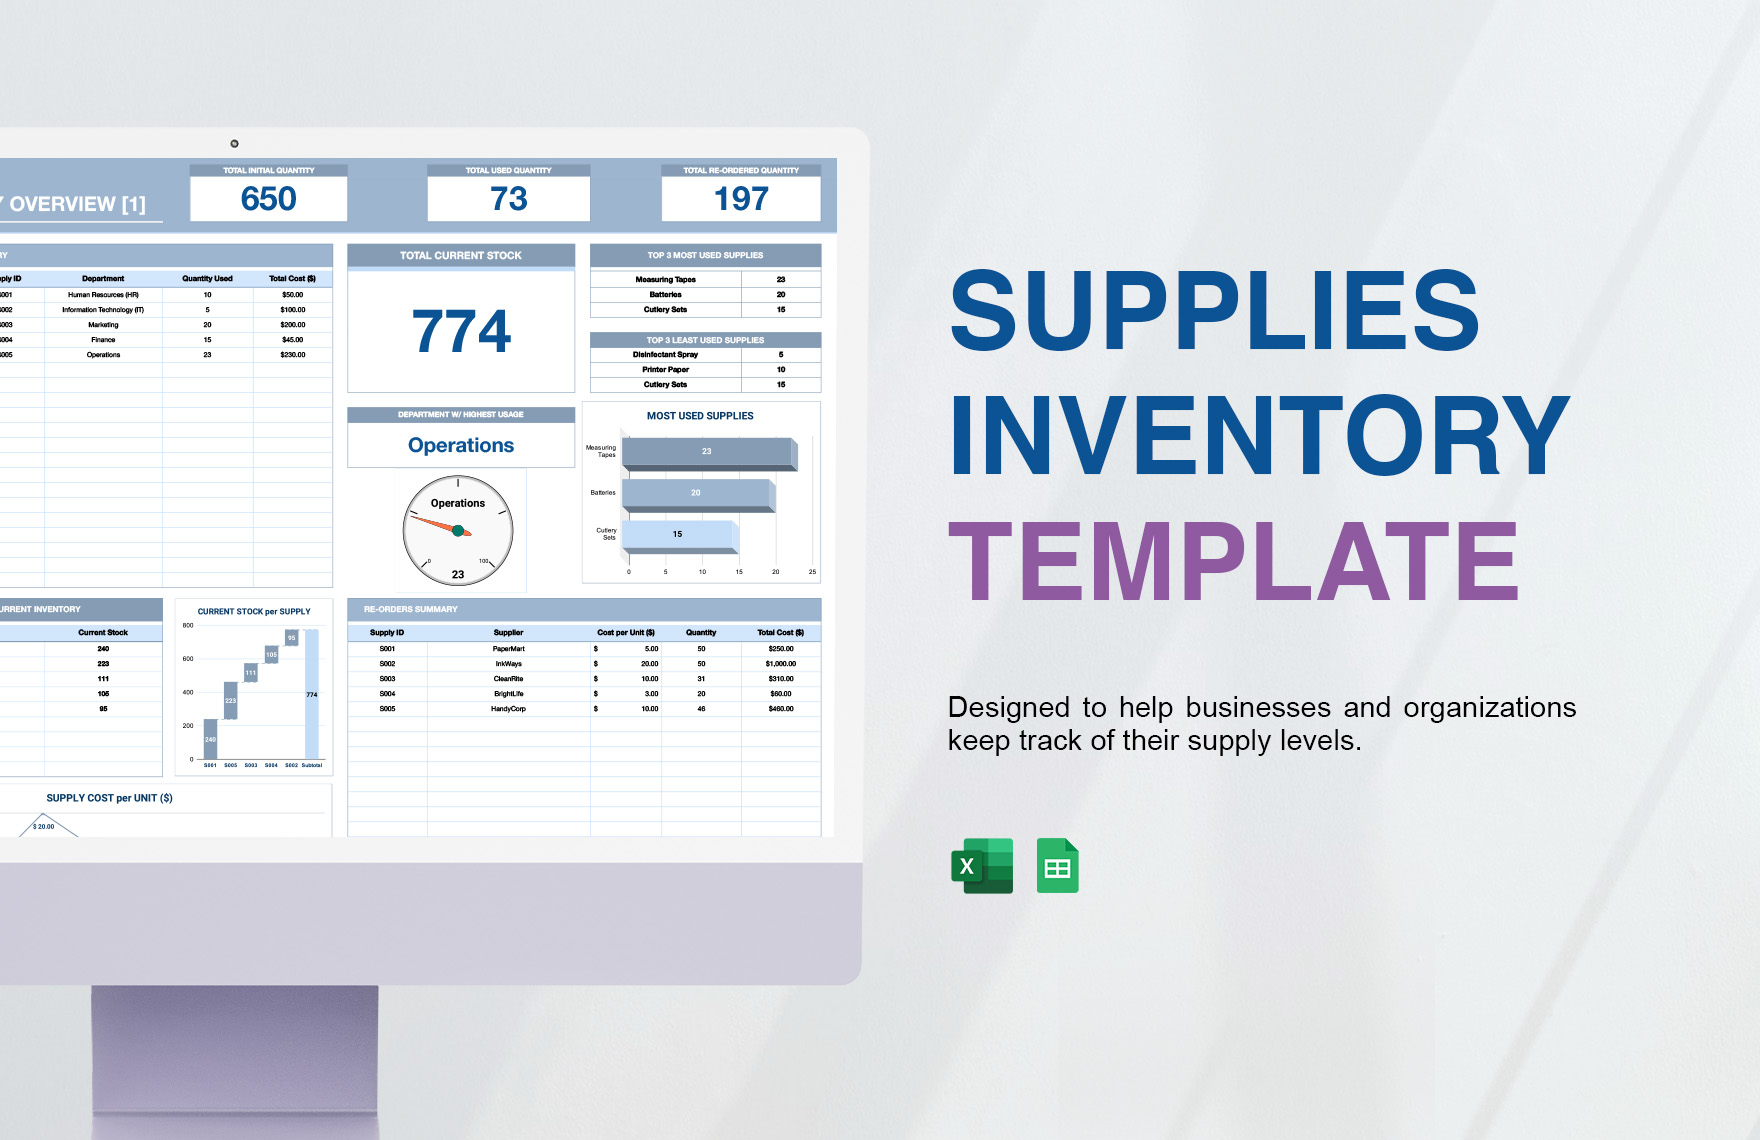 Supplies Inventory Template